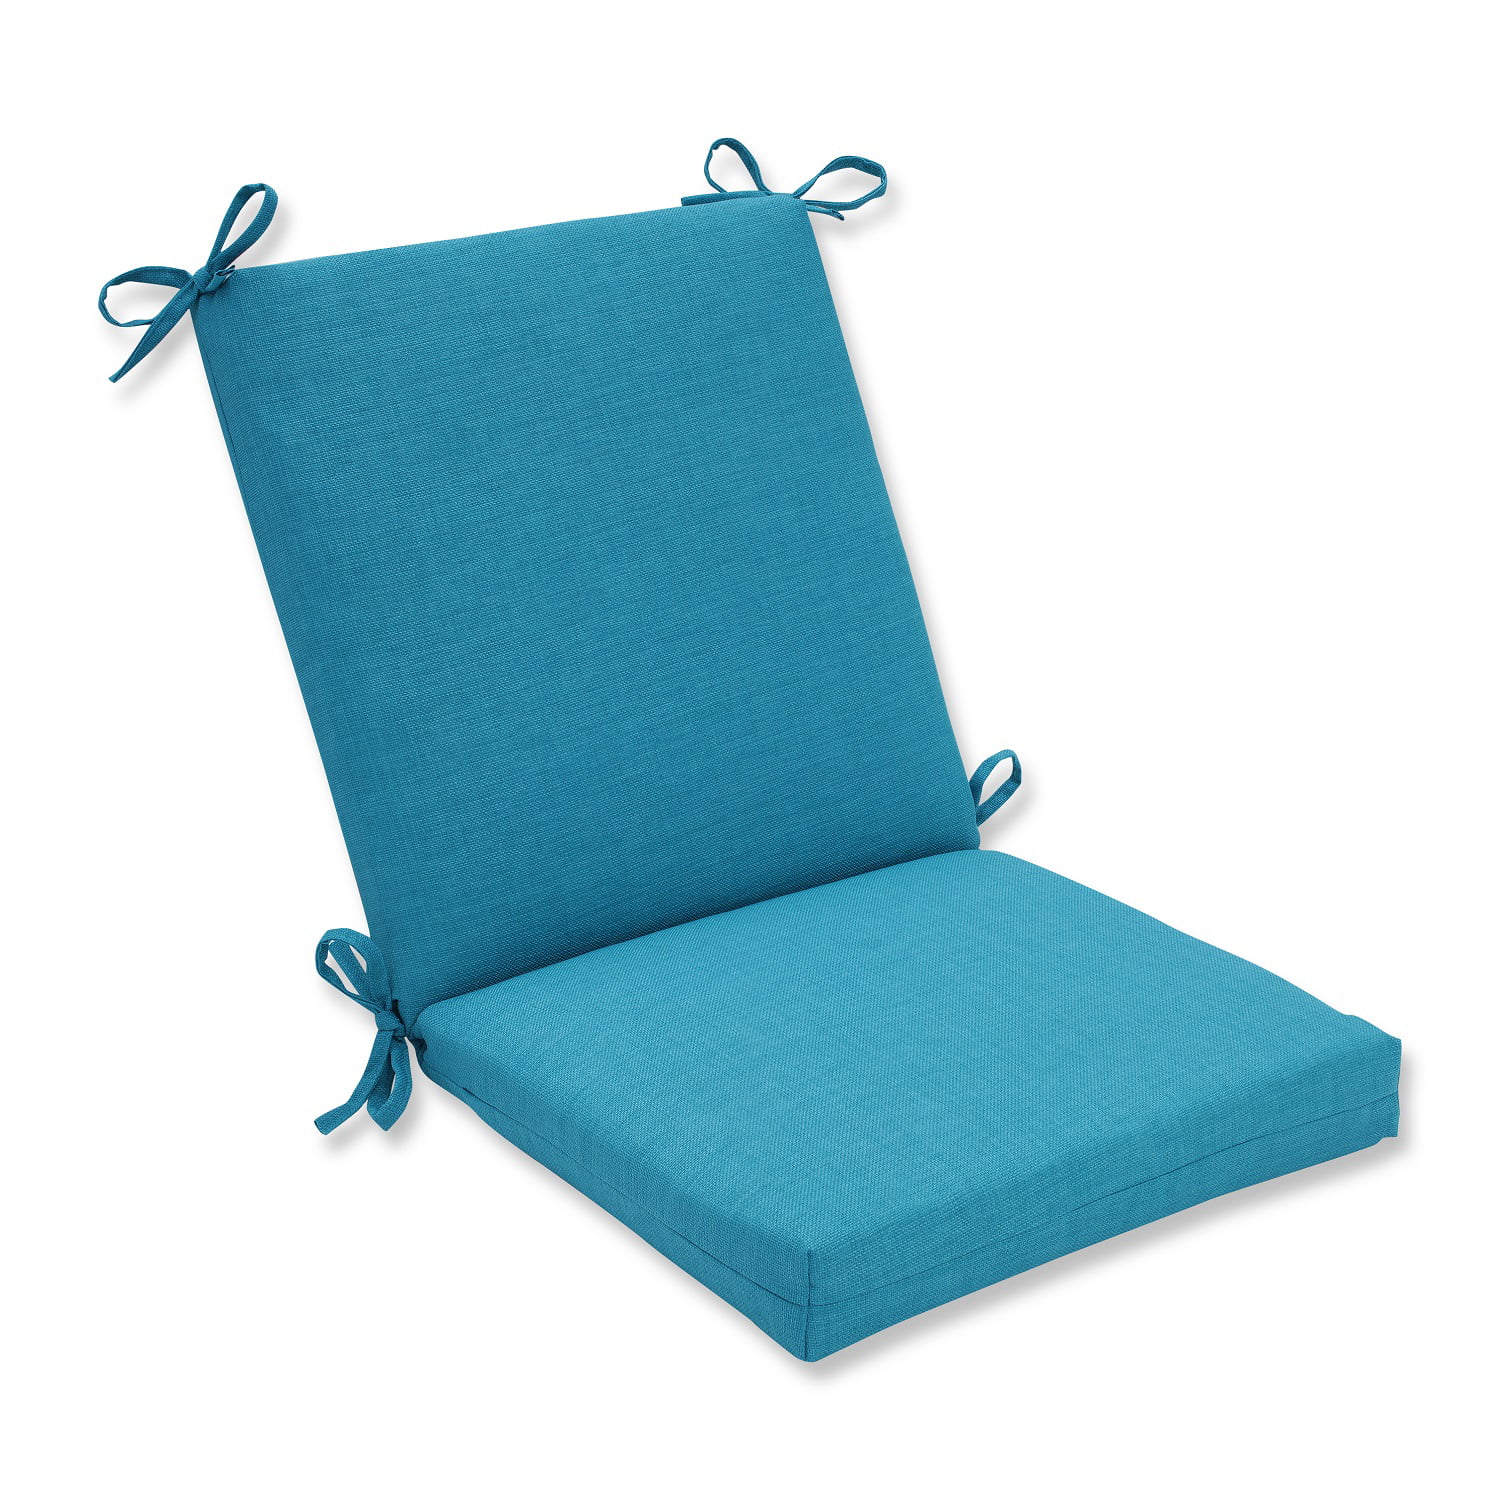 Blue Chair Cushion 42"x20" Outdoor Caribbean Style Seat Pad Floral All Weather 